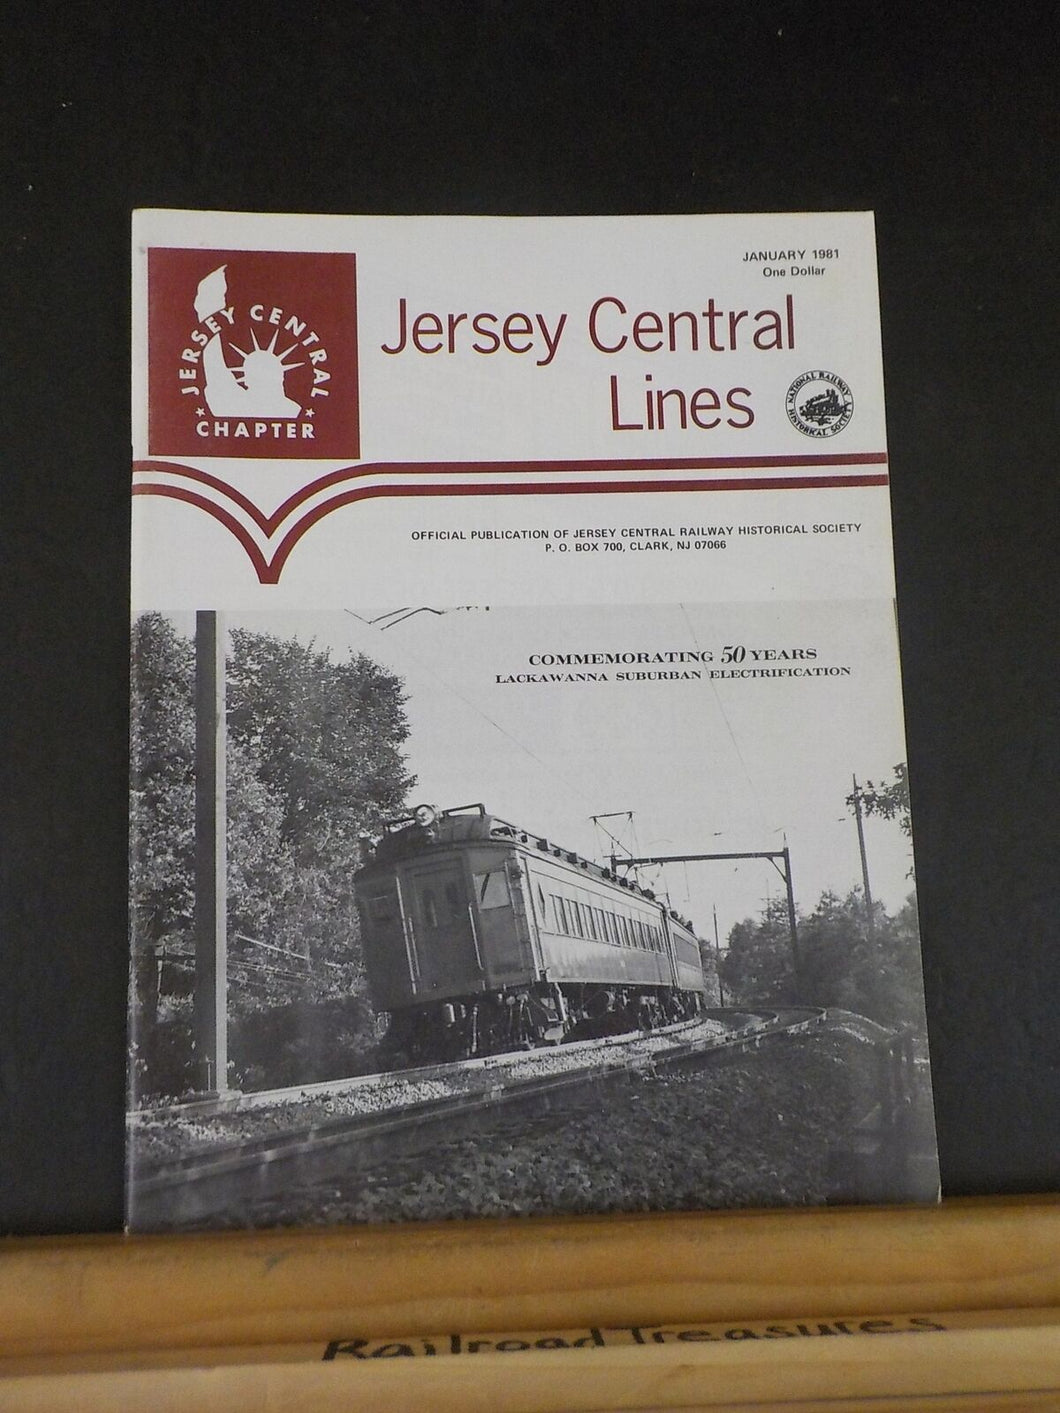 Jersey Central Line NRHS 1981 January Camelbacks Wabash in Pittsburgh Lackawanna